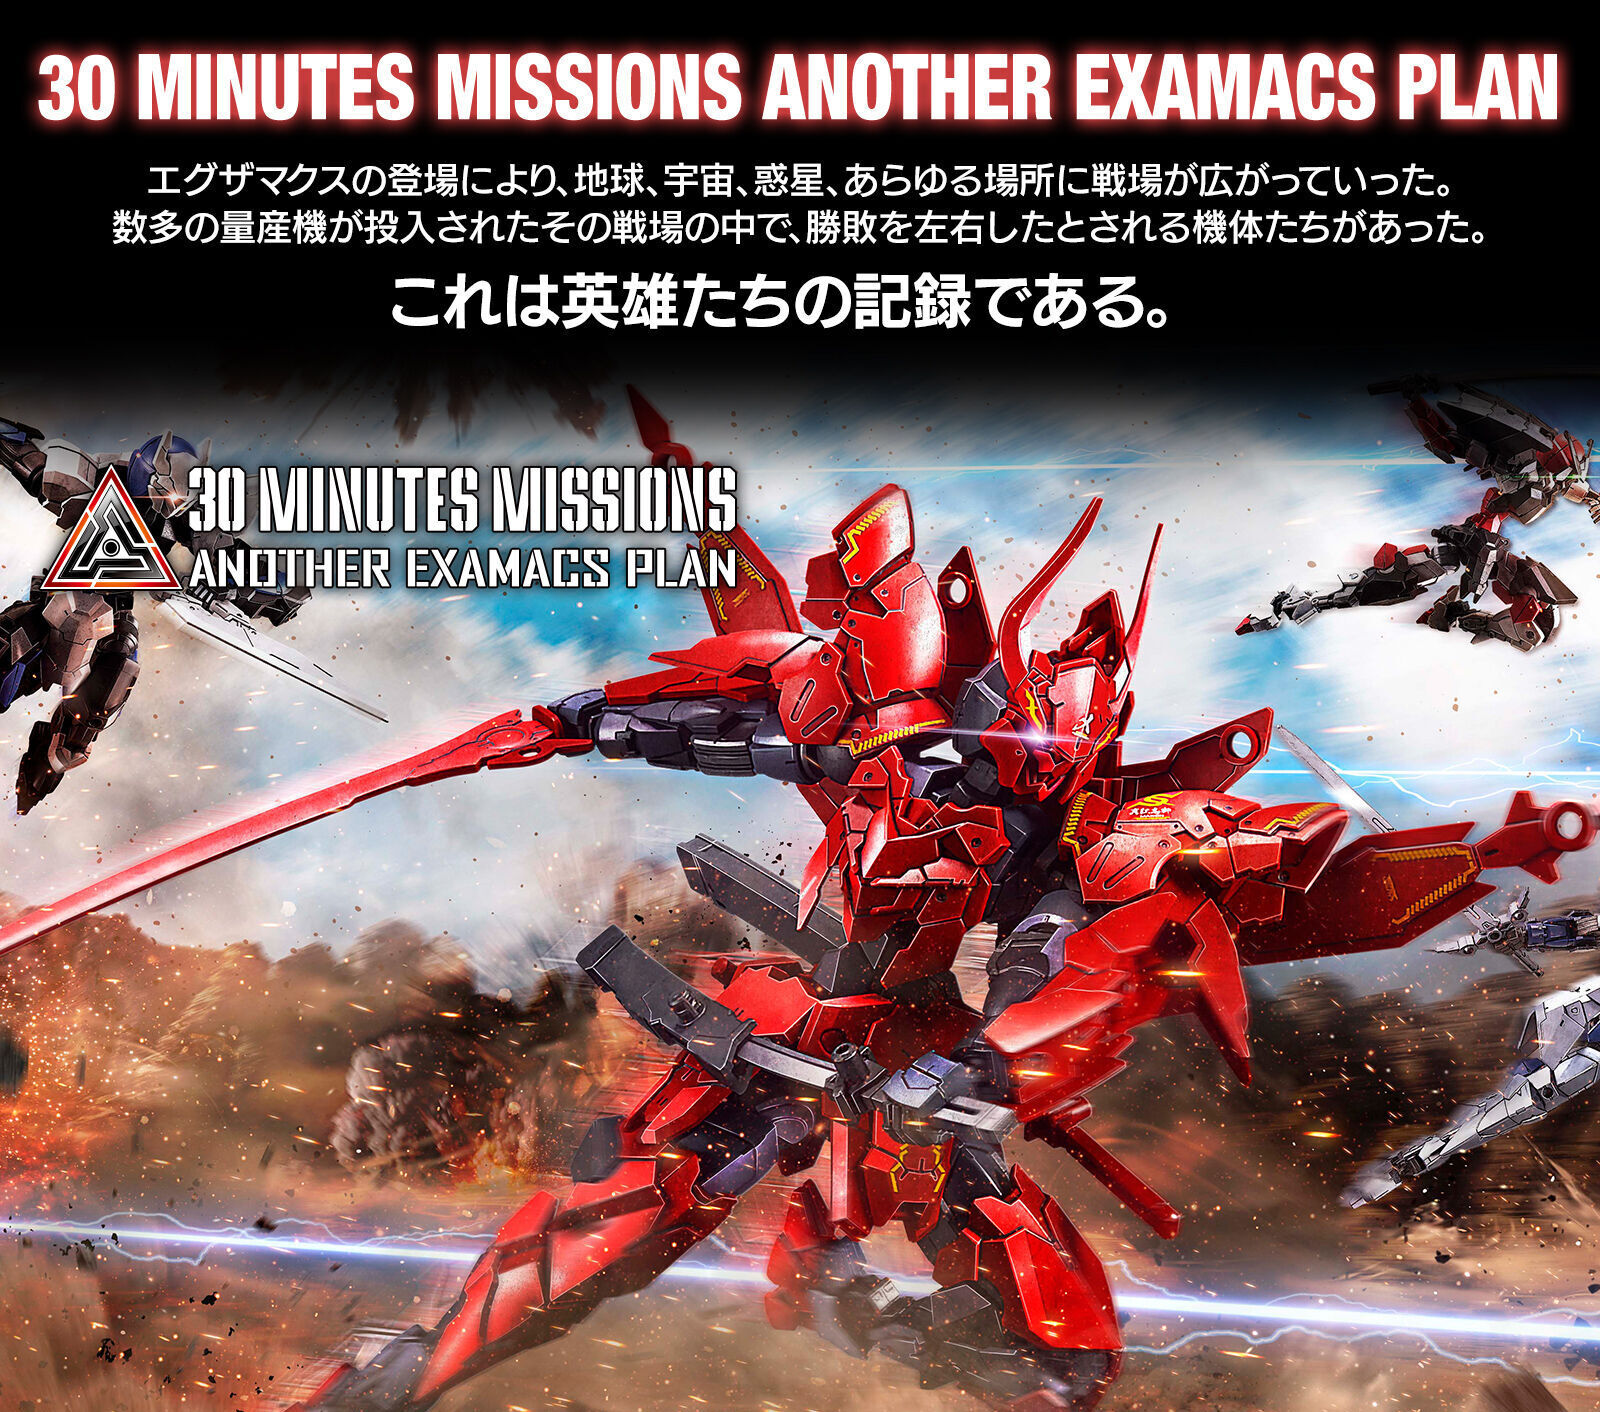 30 MINUTES MISSIONS ANOTHER EXAMAXS PLAN